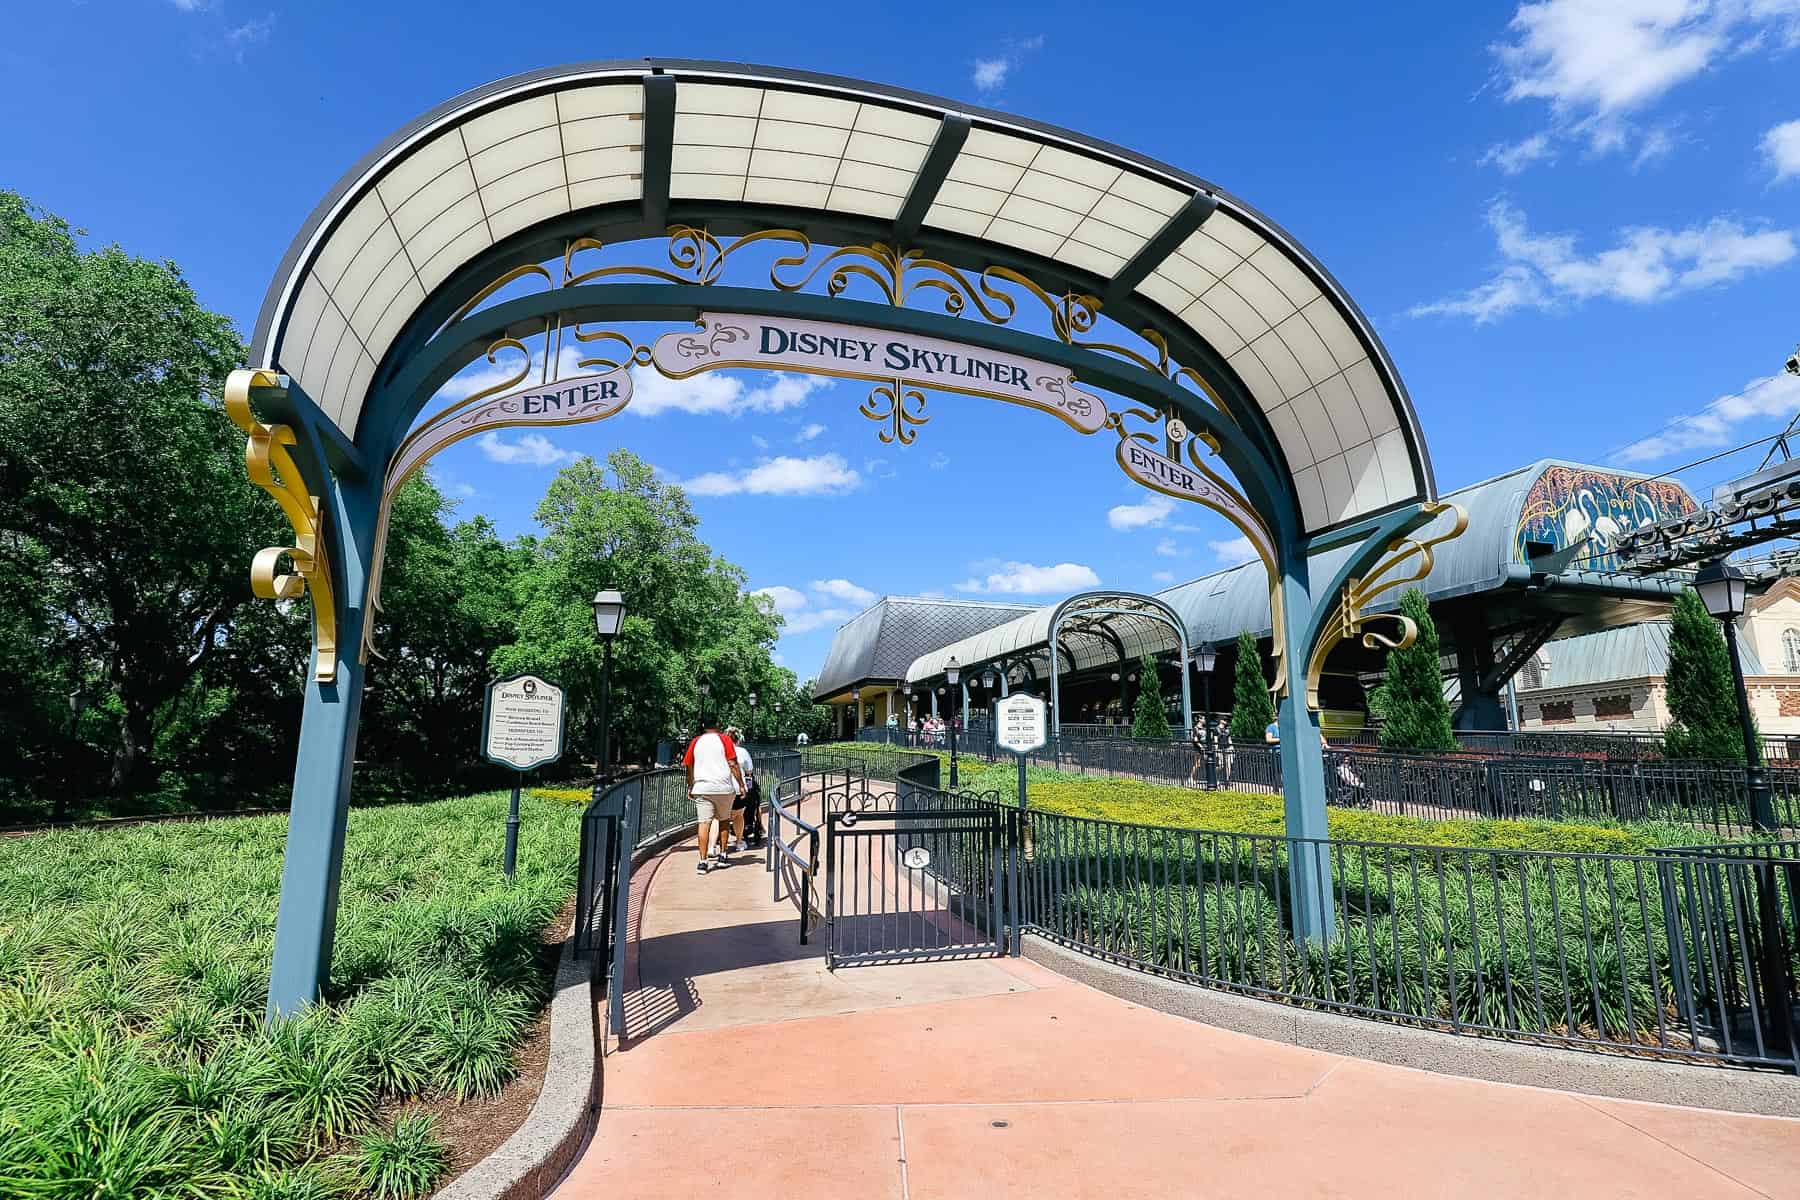 the entrance to the Disney Skyliner station at Epcot's International Gateway 